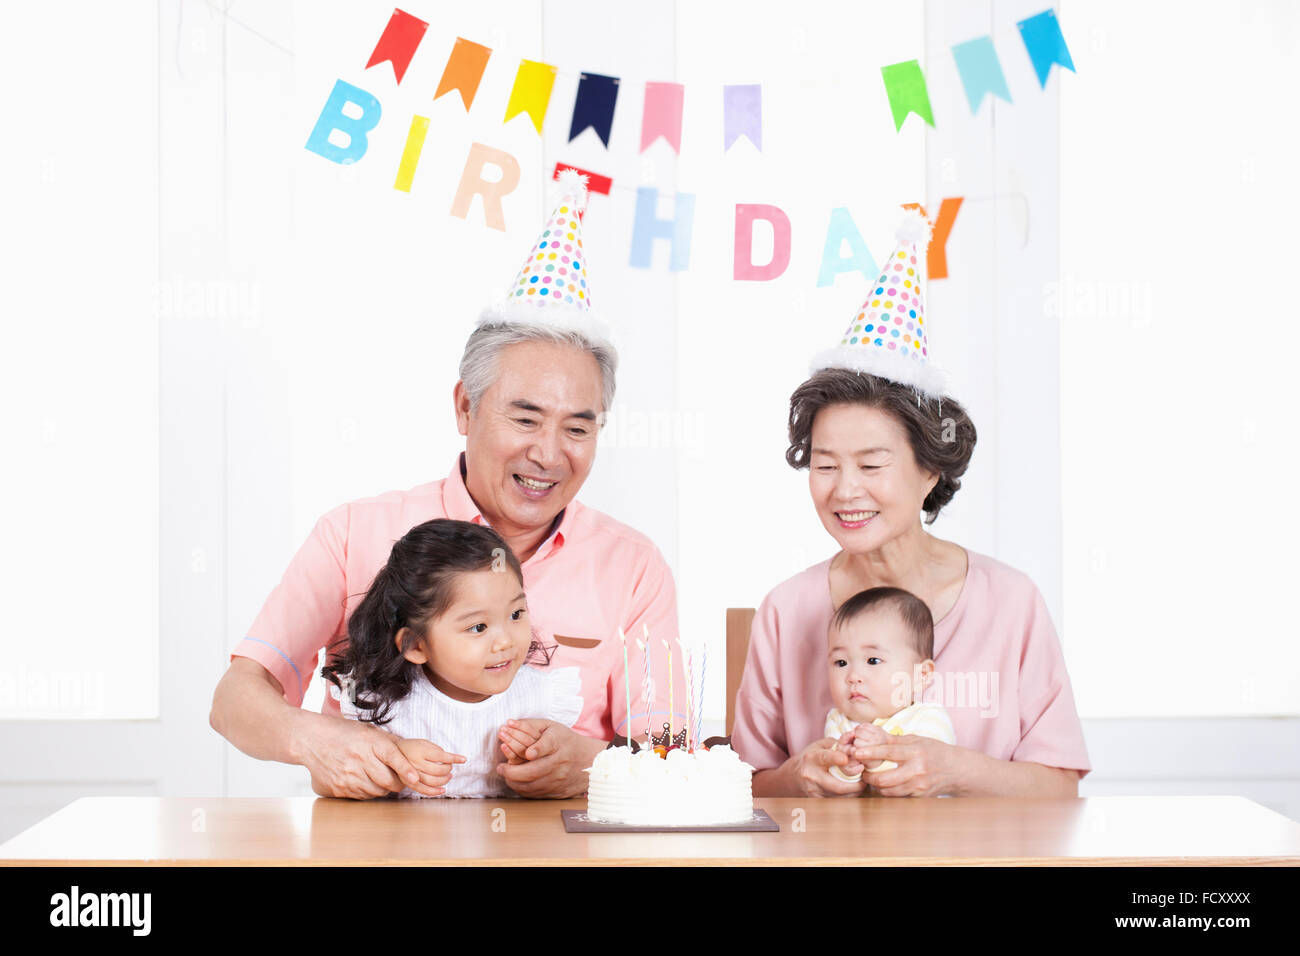 Portrait of old couple with thier grandchildren at birthday party Stock Photo